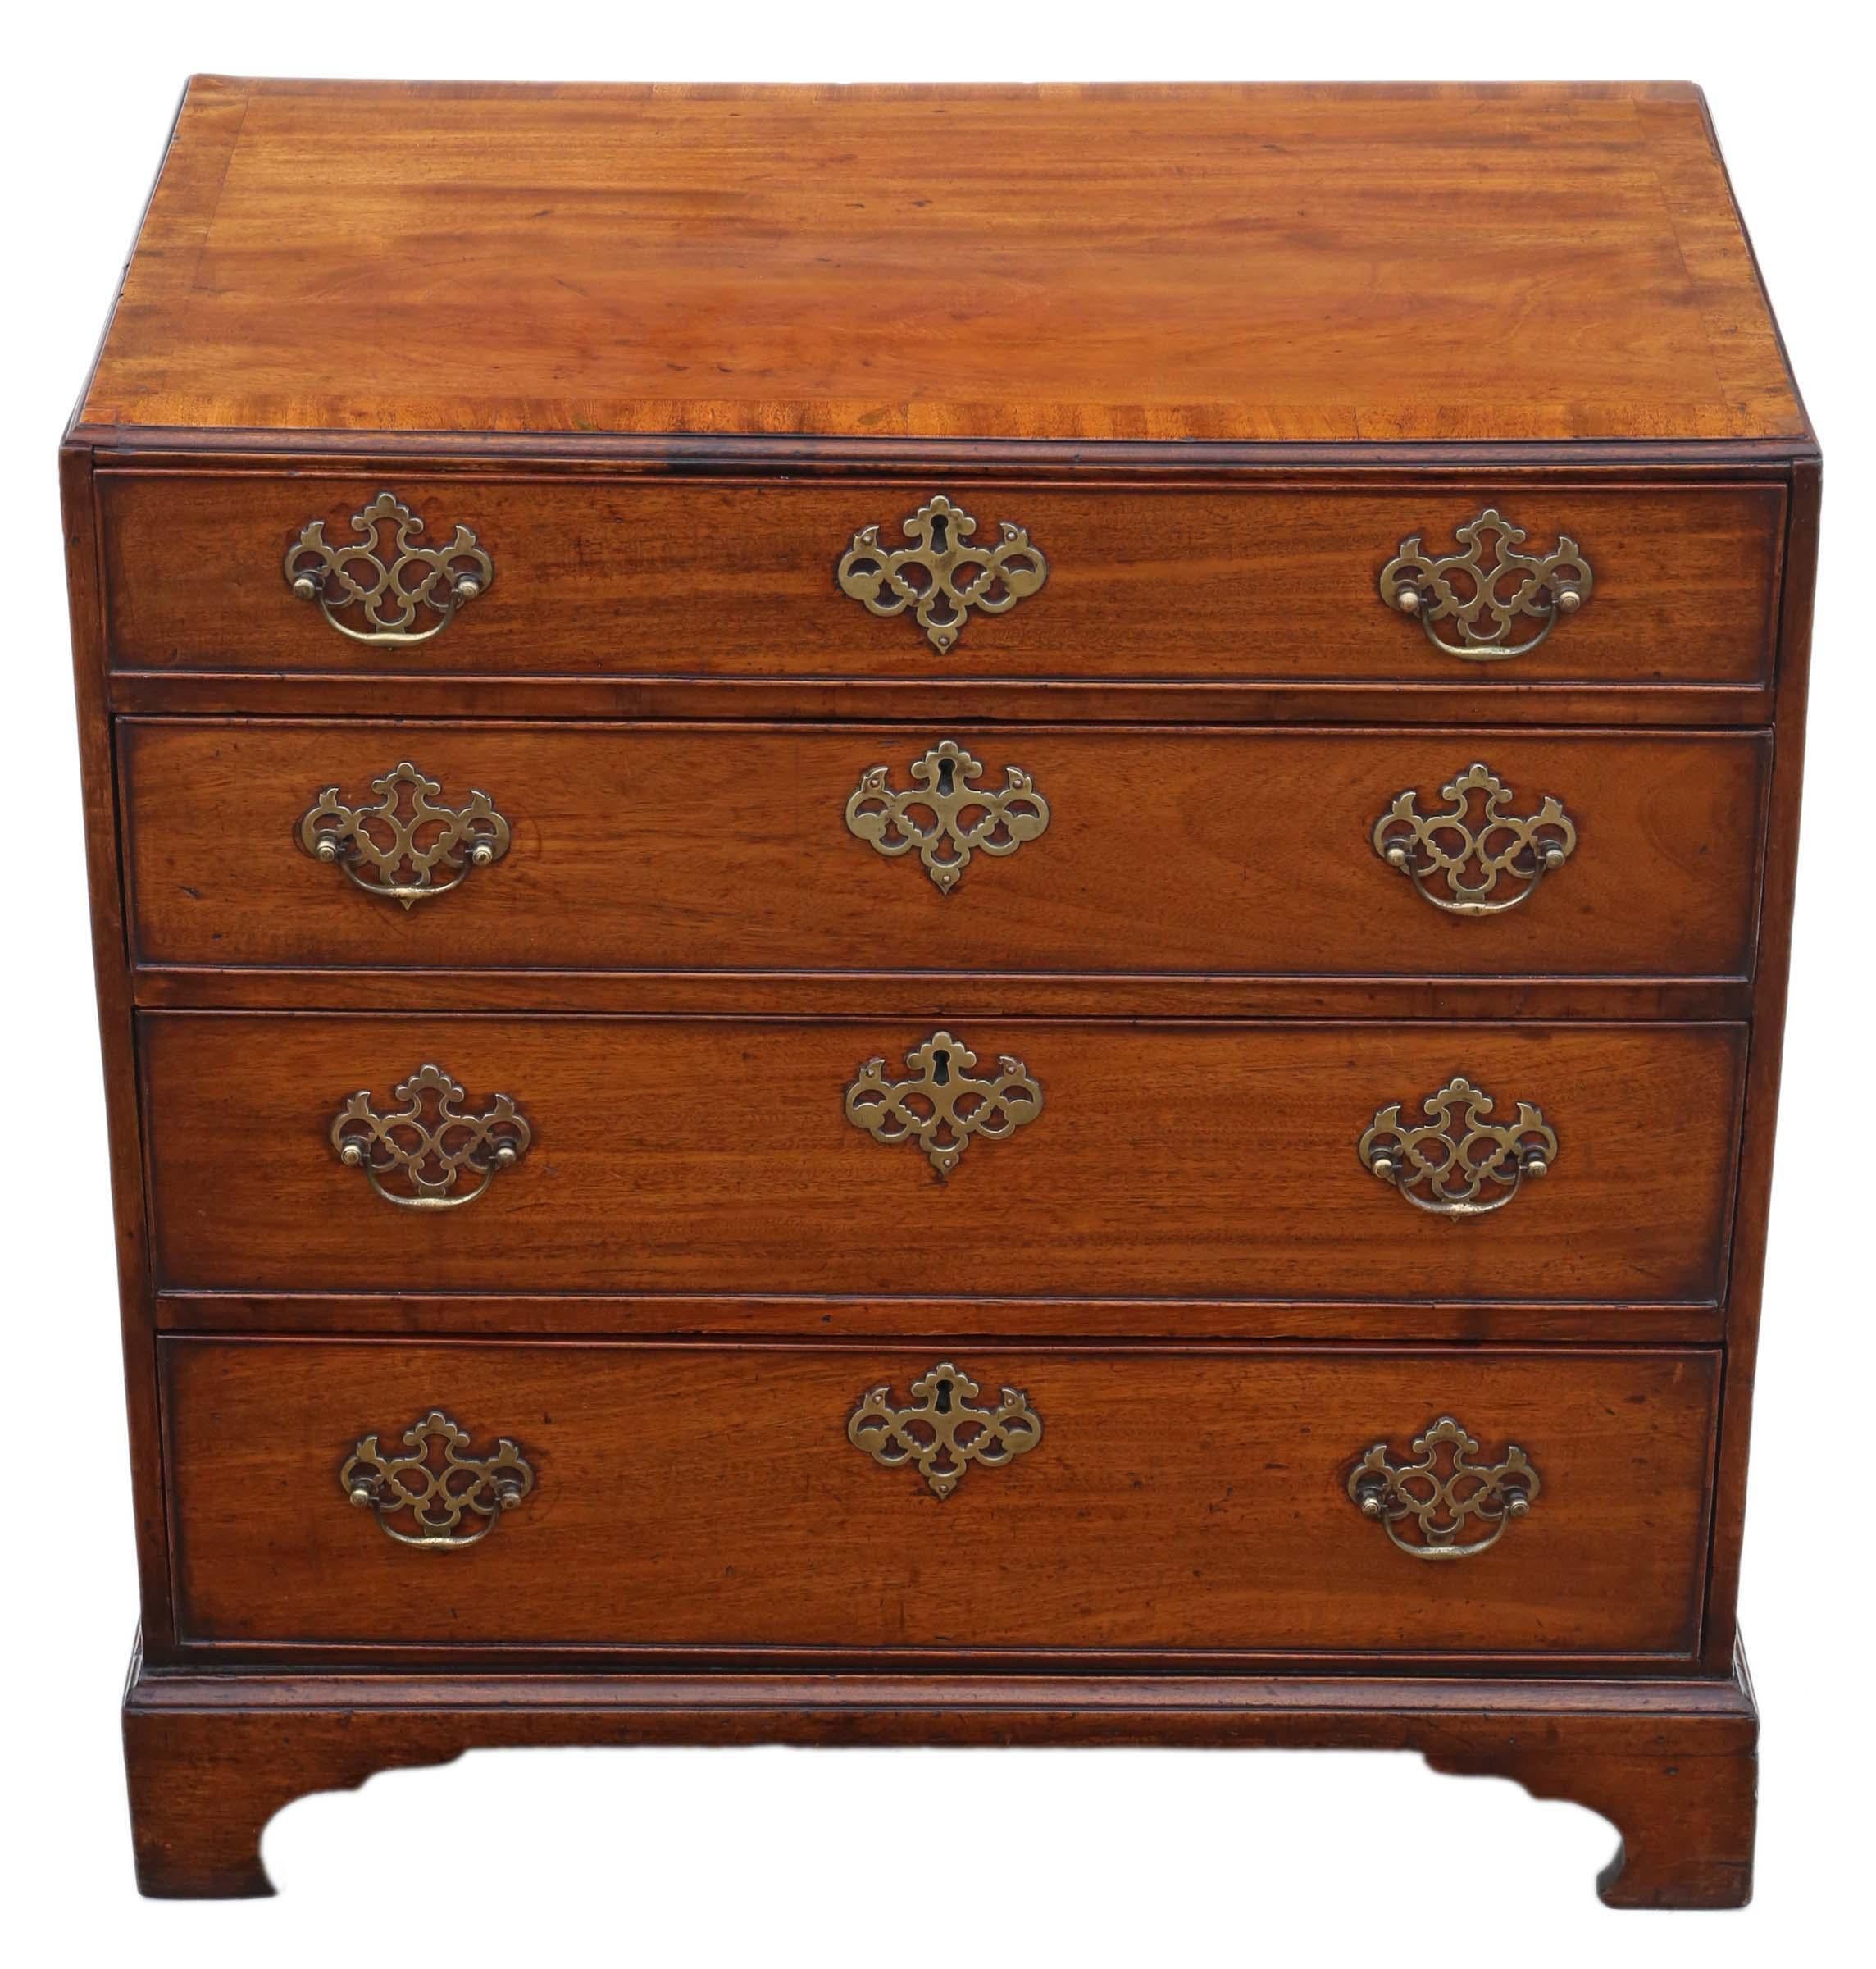 Antique quality Georgian 19th century mahogany chest of drawers C1800, with a caddy top and lovely proportions.

Great rare item, which has no loose joints and lovely compact proportions.

Good age, colour and patina. The drawers slide